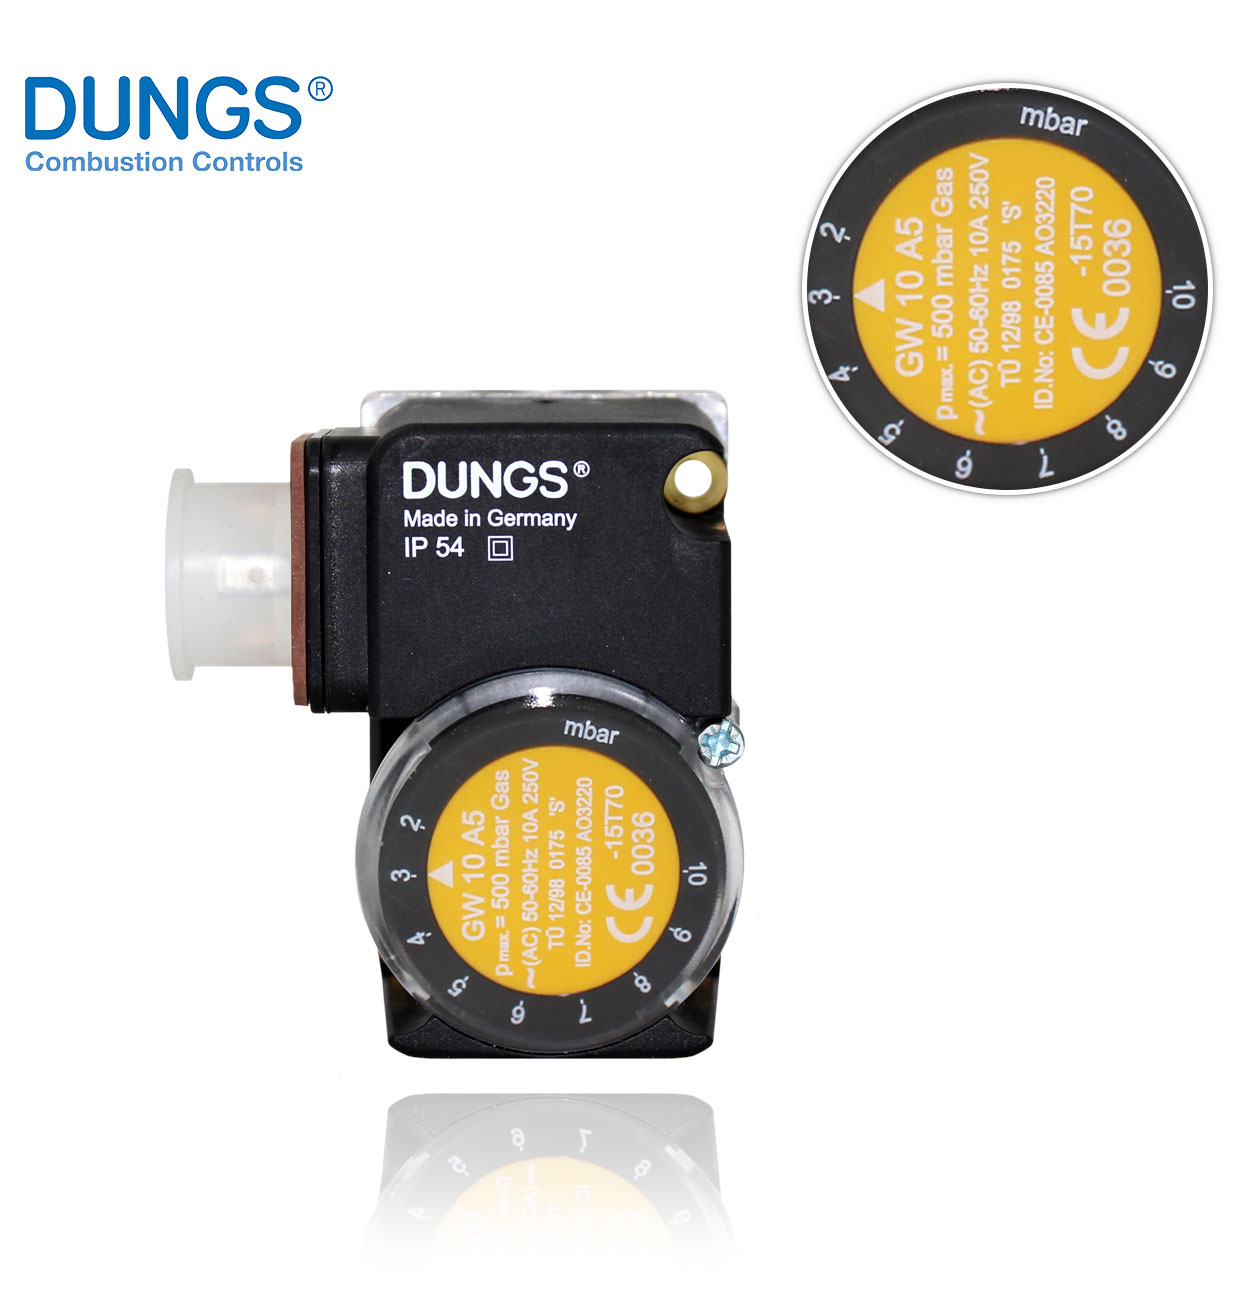 GW 10 A5 DUNGS PRESSURE SWITCH